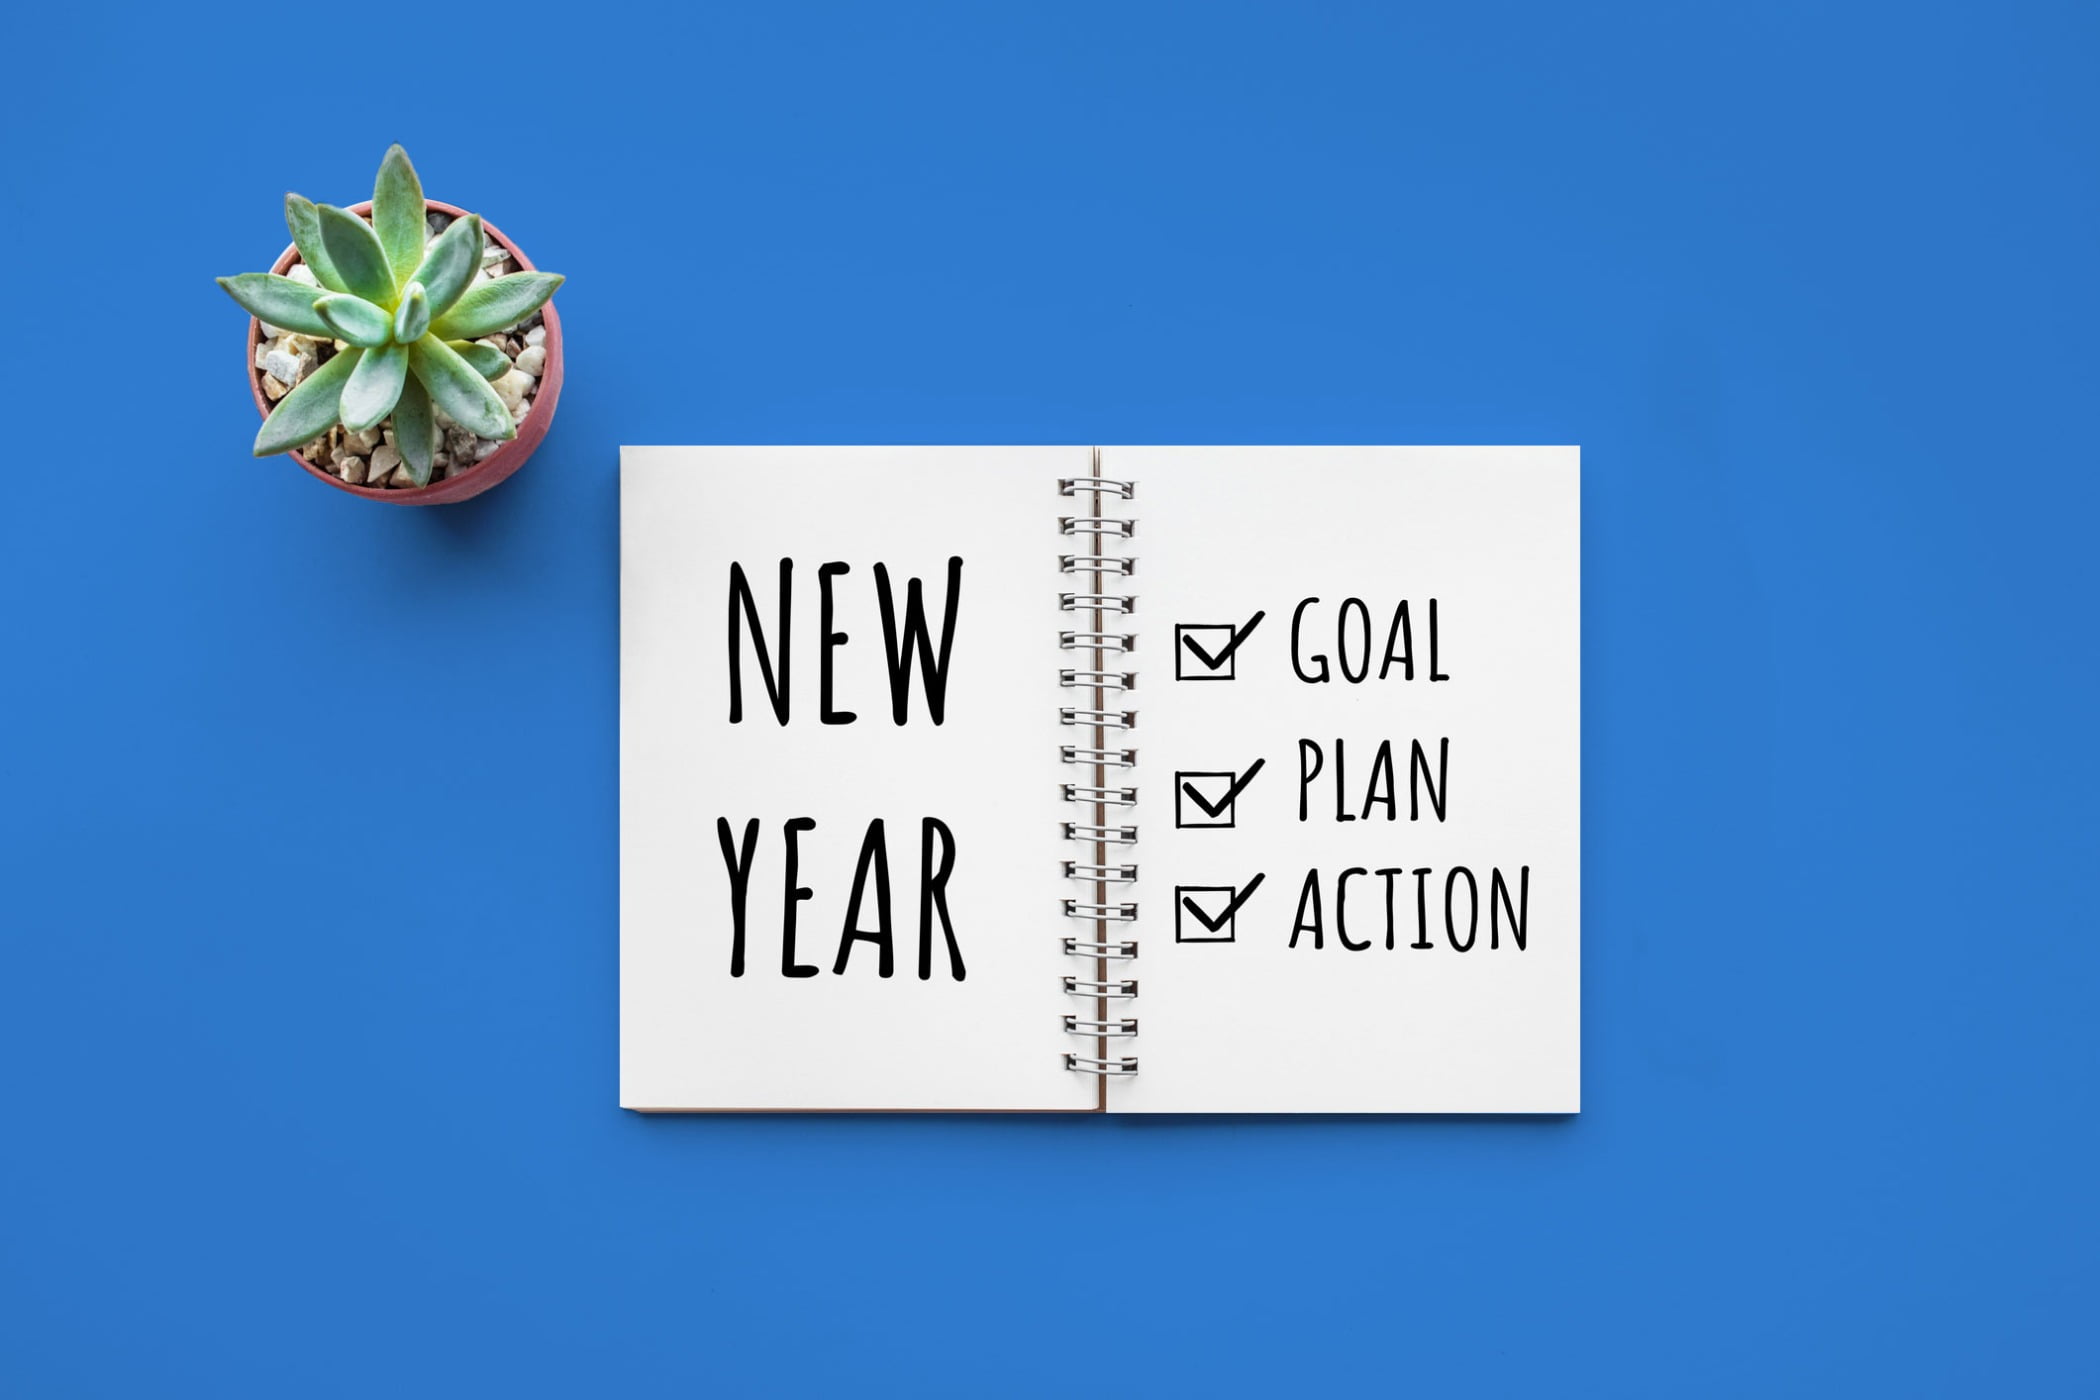 New Year, goal, plan, action